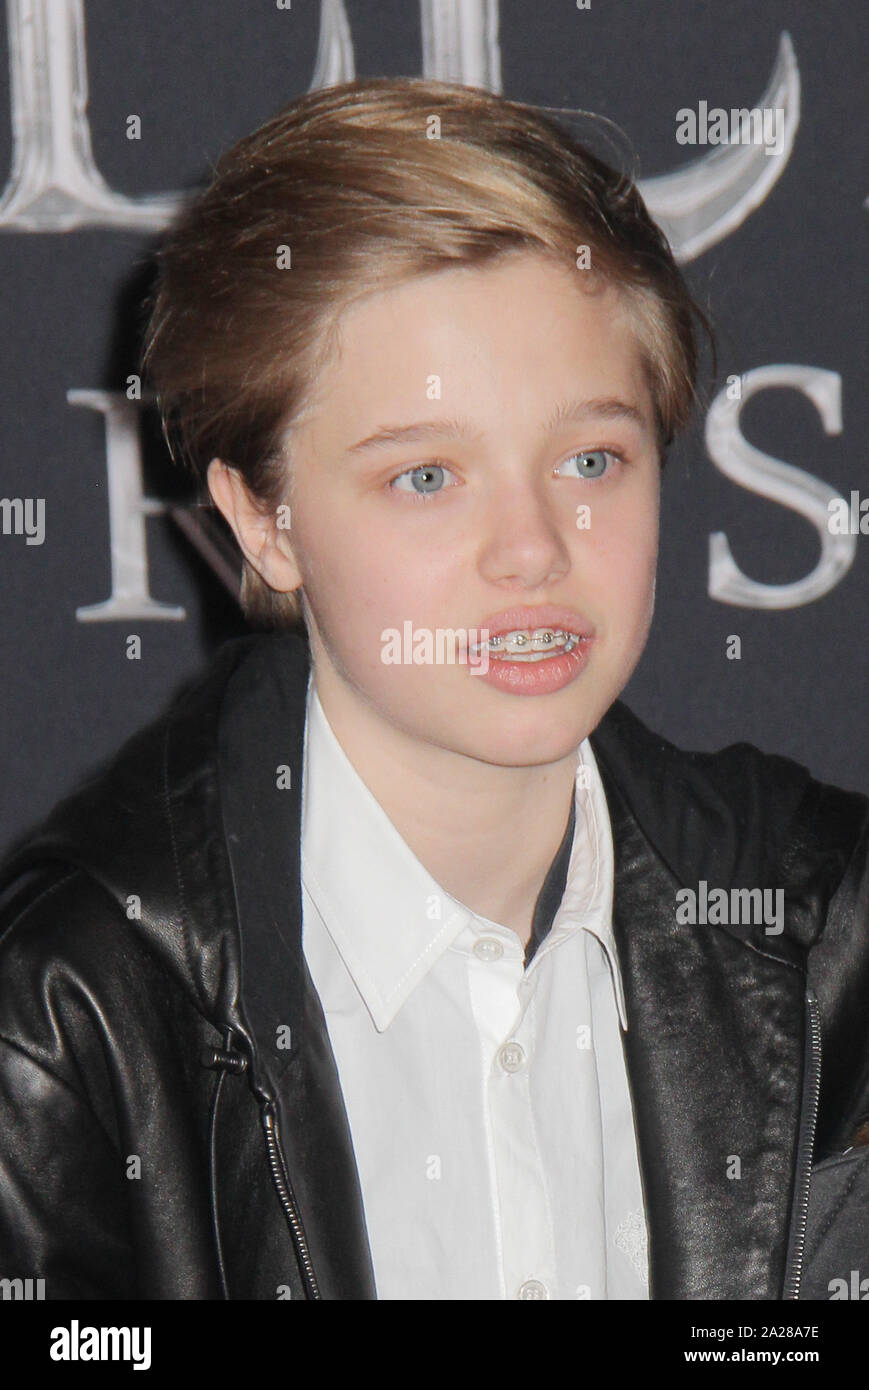 Los Angeles, USA. 30th Sep, 2019. Shiloh Nouvel Jolie-Pitt 09/30/2019 The World Premiere of 'Maleficent: Mistress of Evil' held at the El CapitanTheatre in Los Angeles, CA Credit: Cronos/Alamy Live News Stock Photo